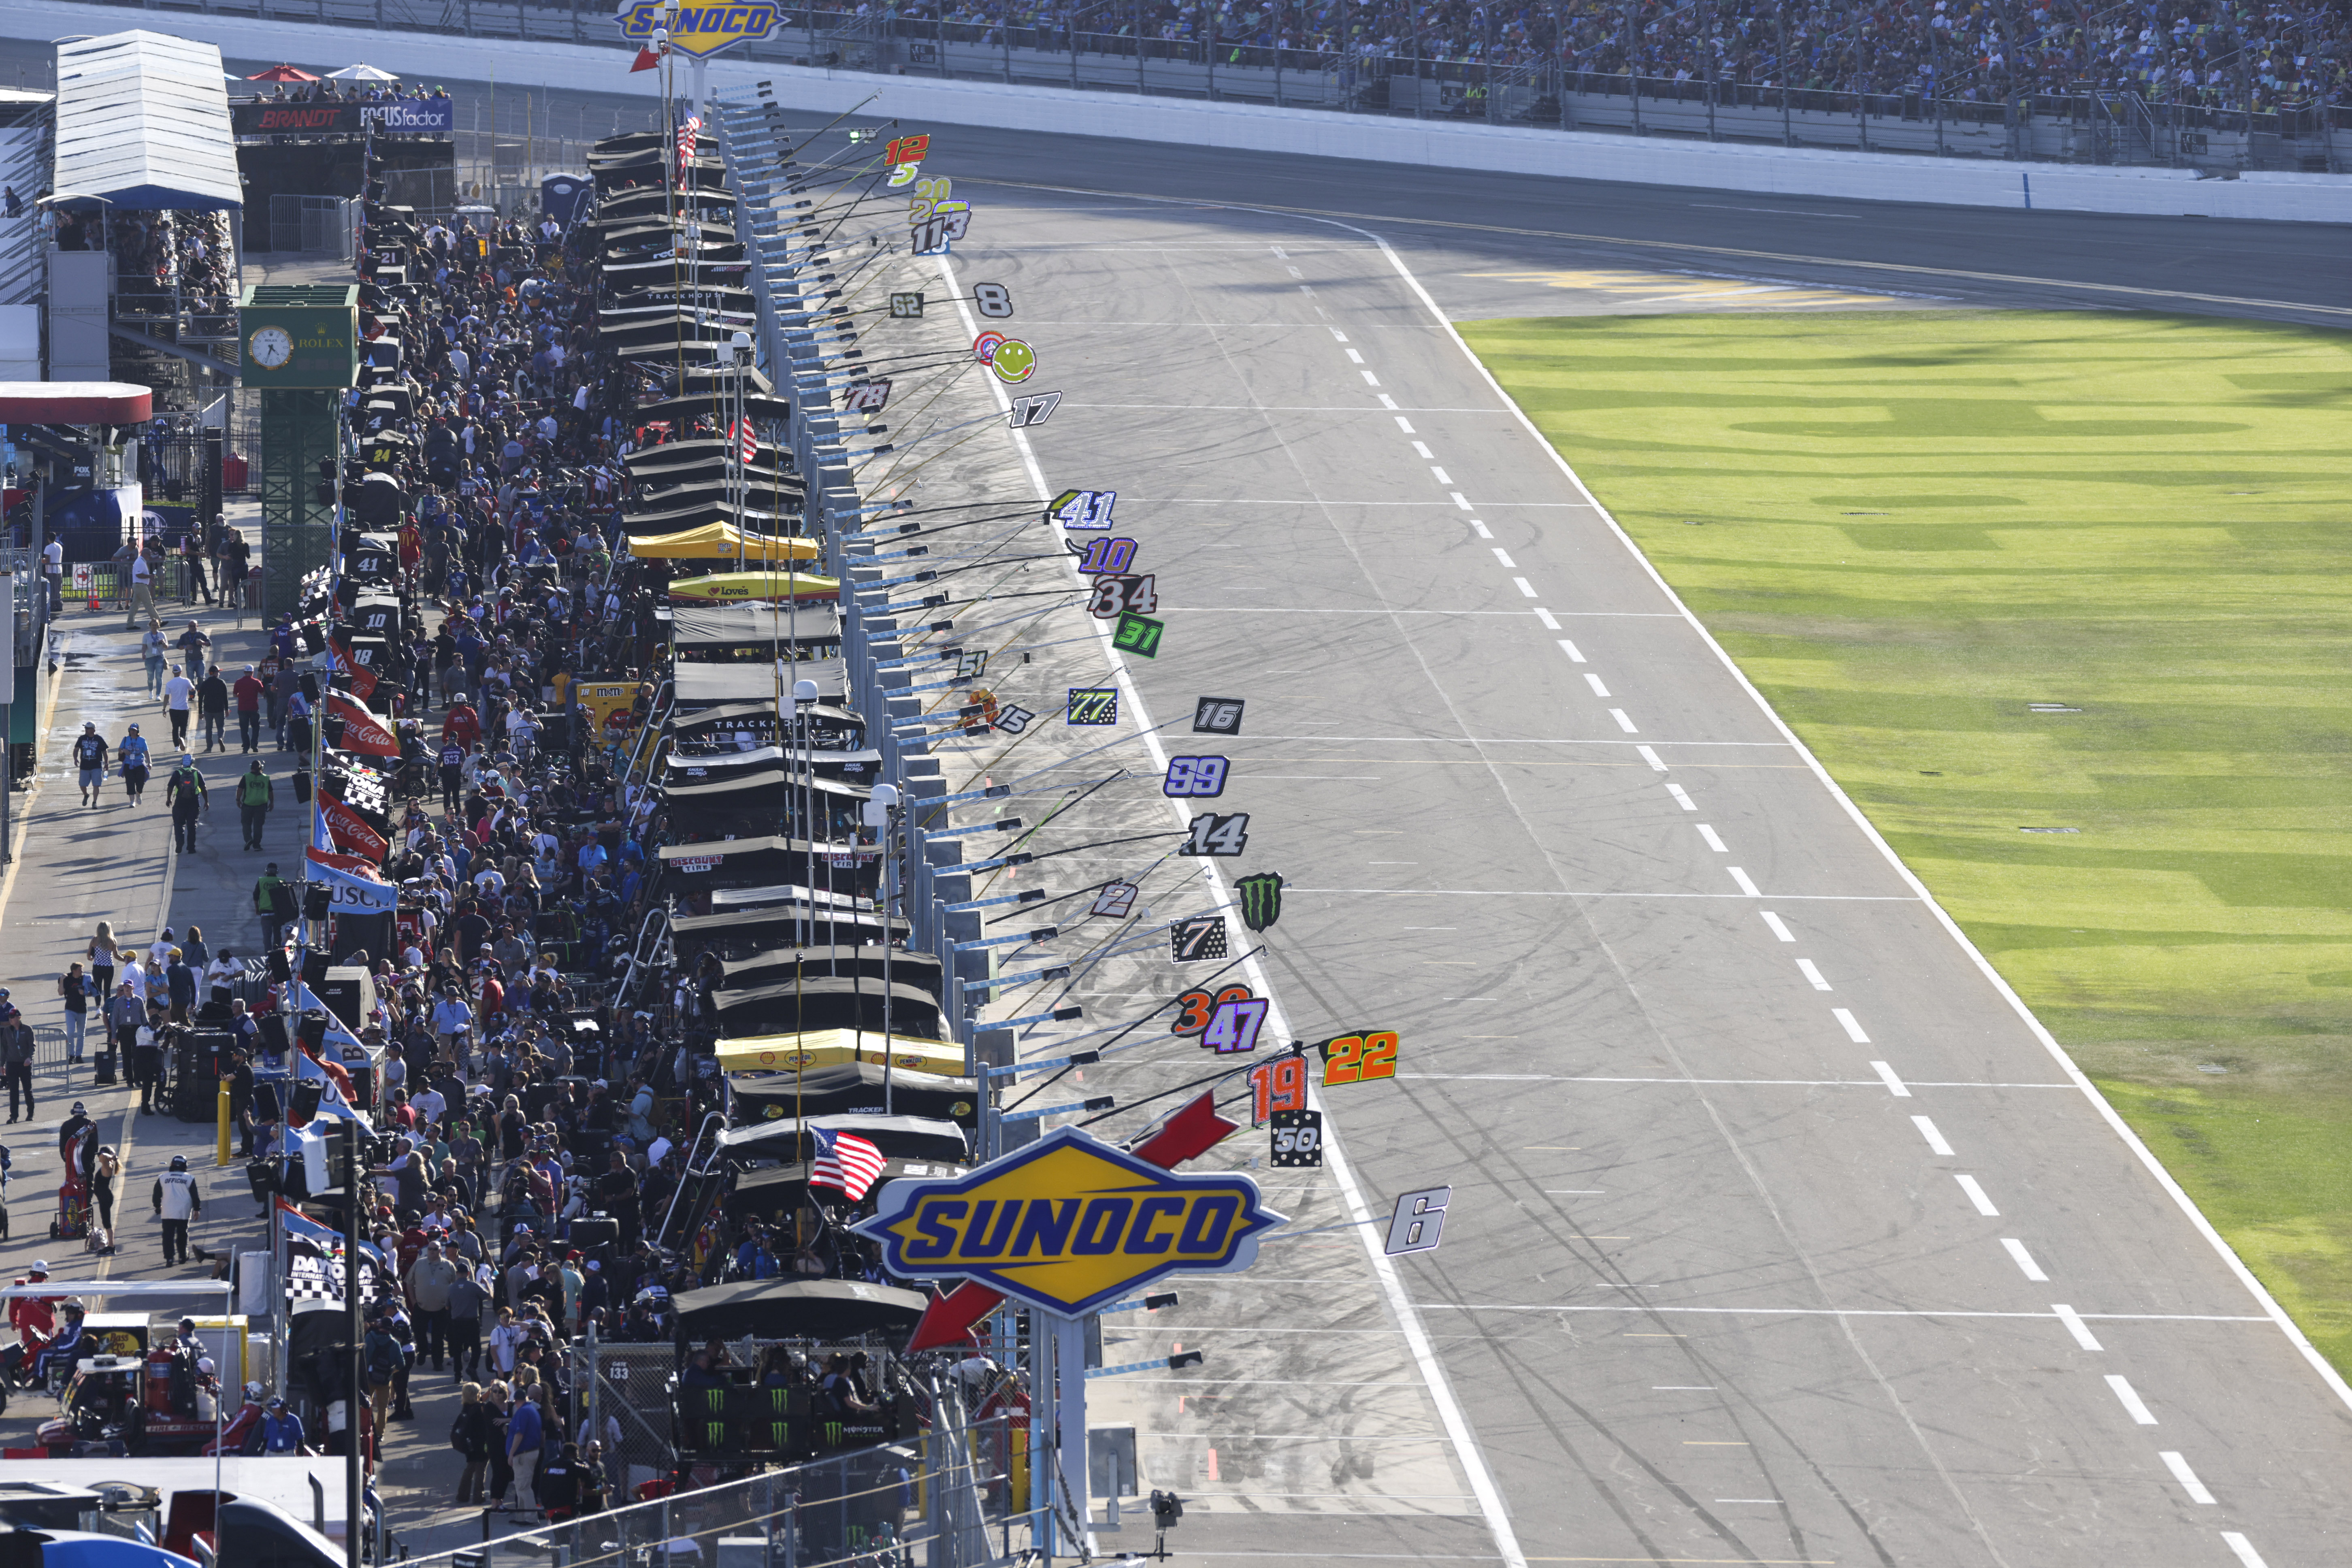 A general view of pit road during the Daytona 500 NASCAR Cup Series race on February 20, 2022 at Daytona International Speedway in Daytona Beach, Fl.